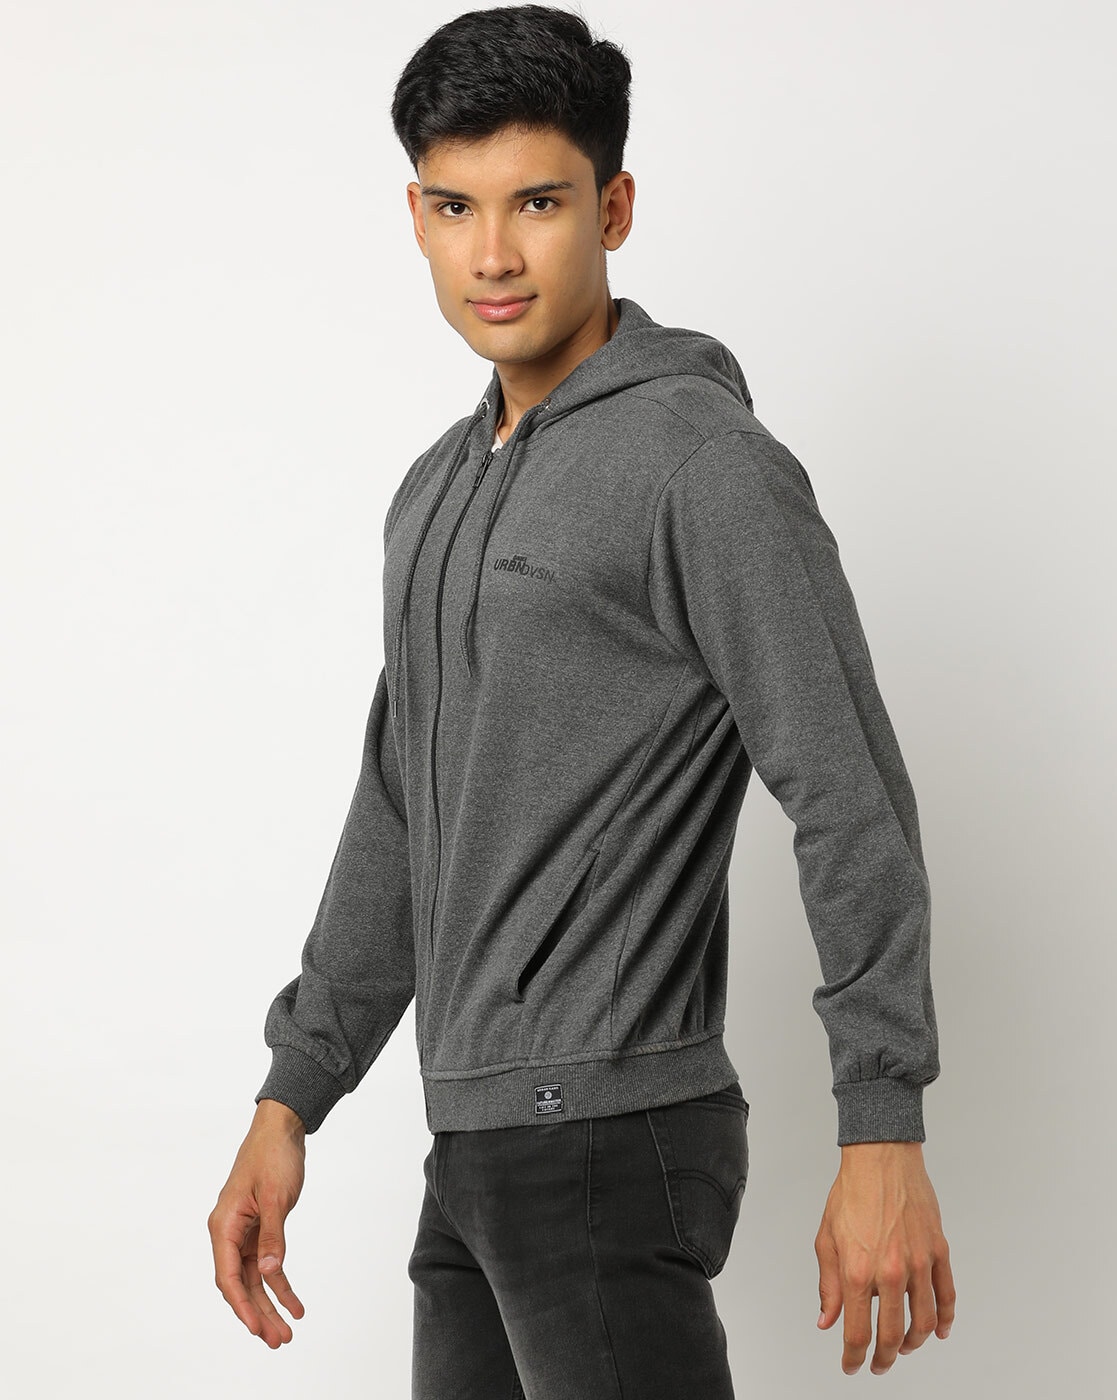 D.GNAK Lace-up Hoodie in Black for Men